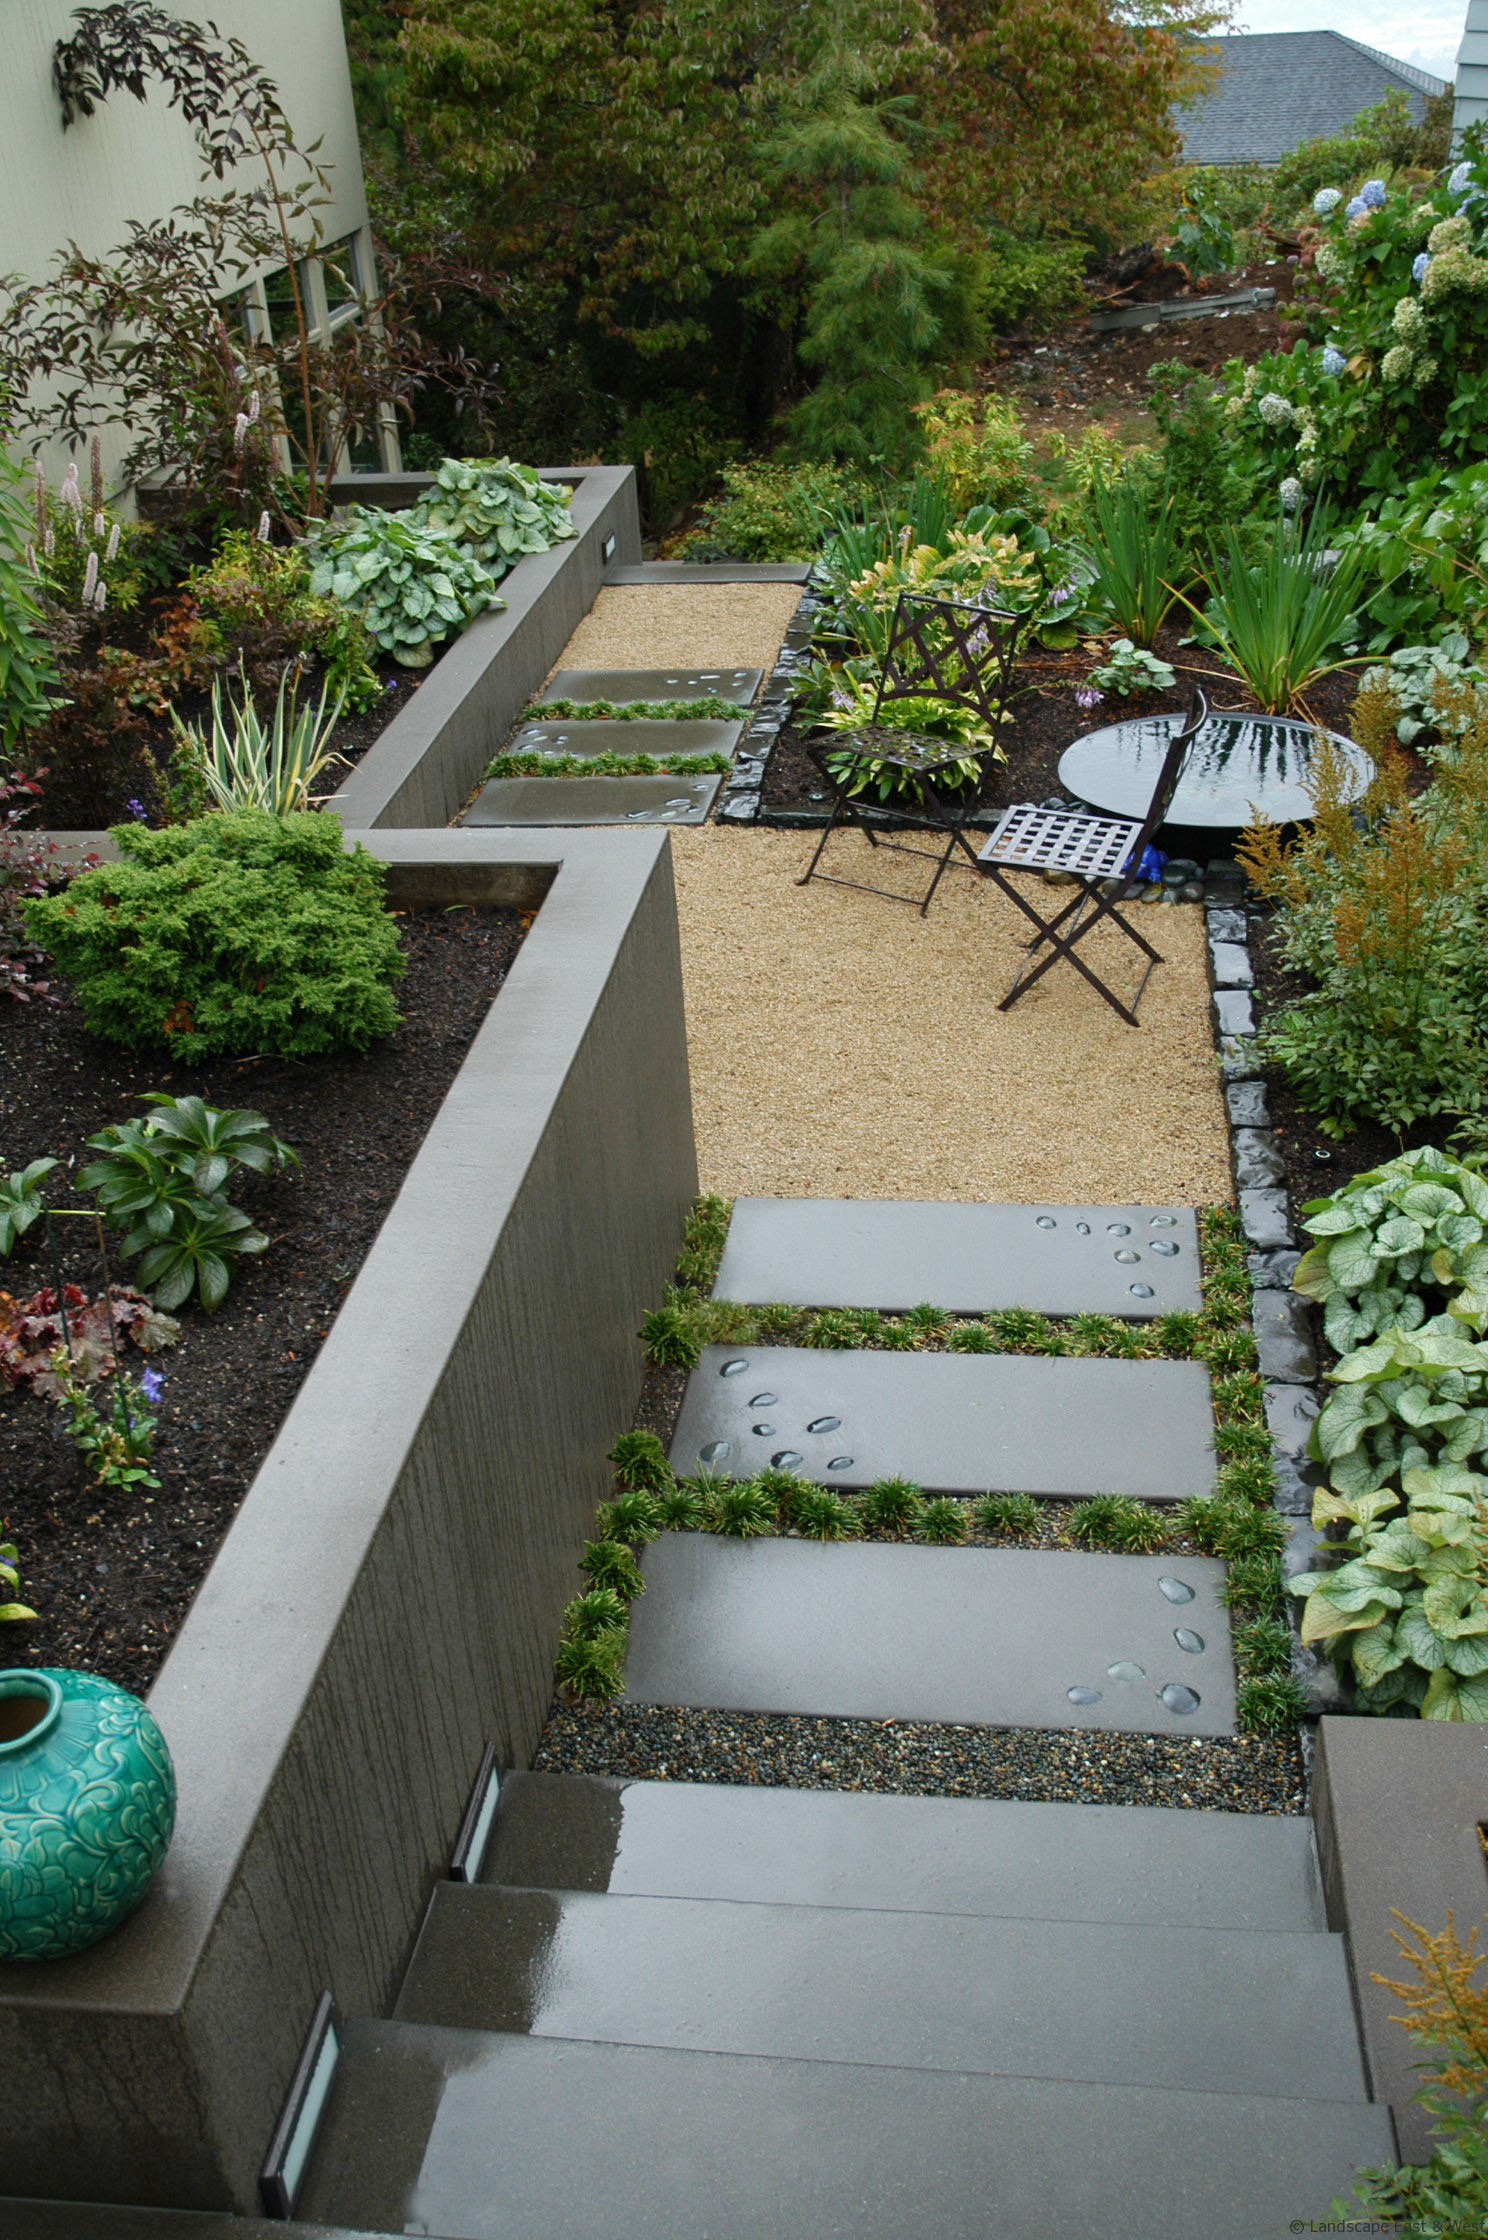 Residential Portland Landscaping: A Photo Tour | Portland ...